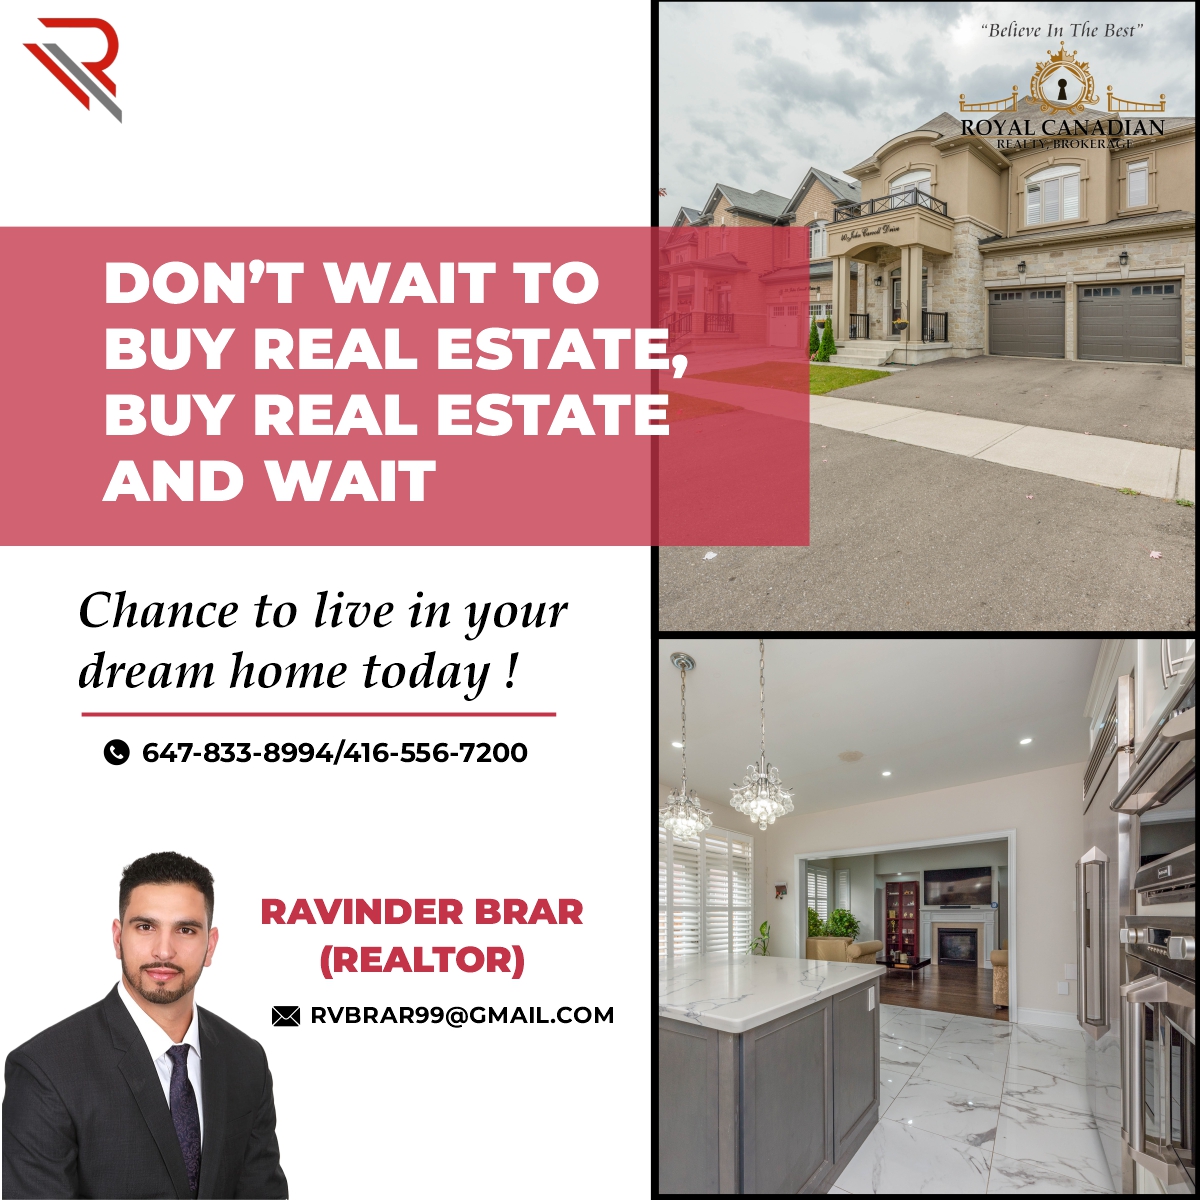 #TeamRB is all set to help you buy #realestateinCanada at the best price and begin earning profits from now and here rather than waiting for it. Connect with them today and get the keys to your #dreamhome today!

#RBREALESTATEINC #RBREALESTATE #RBrealtors #teamRV #realestate